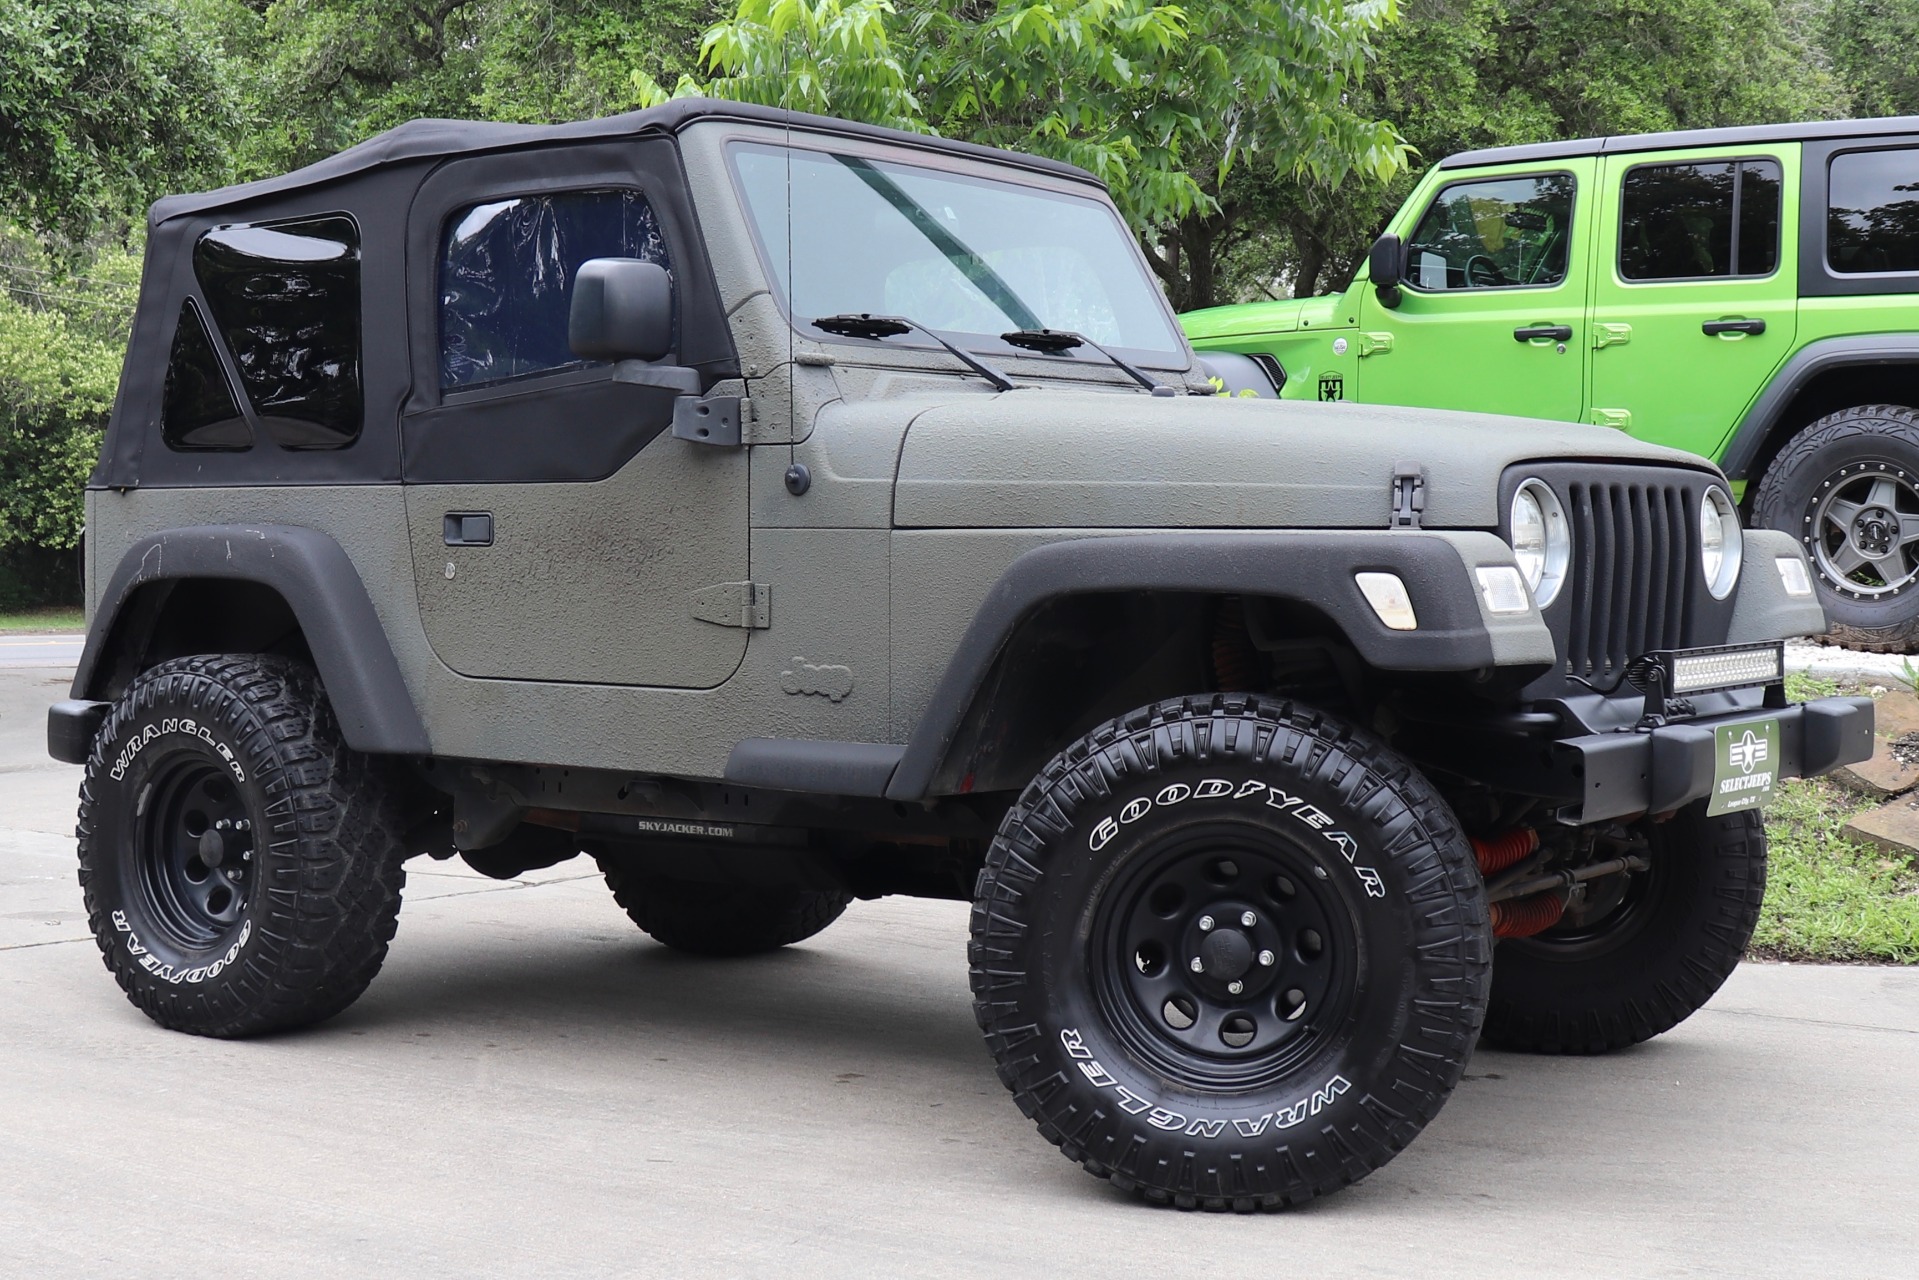 Used 2005 Jeep Wrangler Rocky Mountain For Sale ($10,995) | Select Jeeps  Inc. Stock #355134